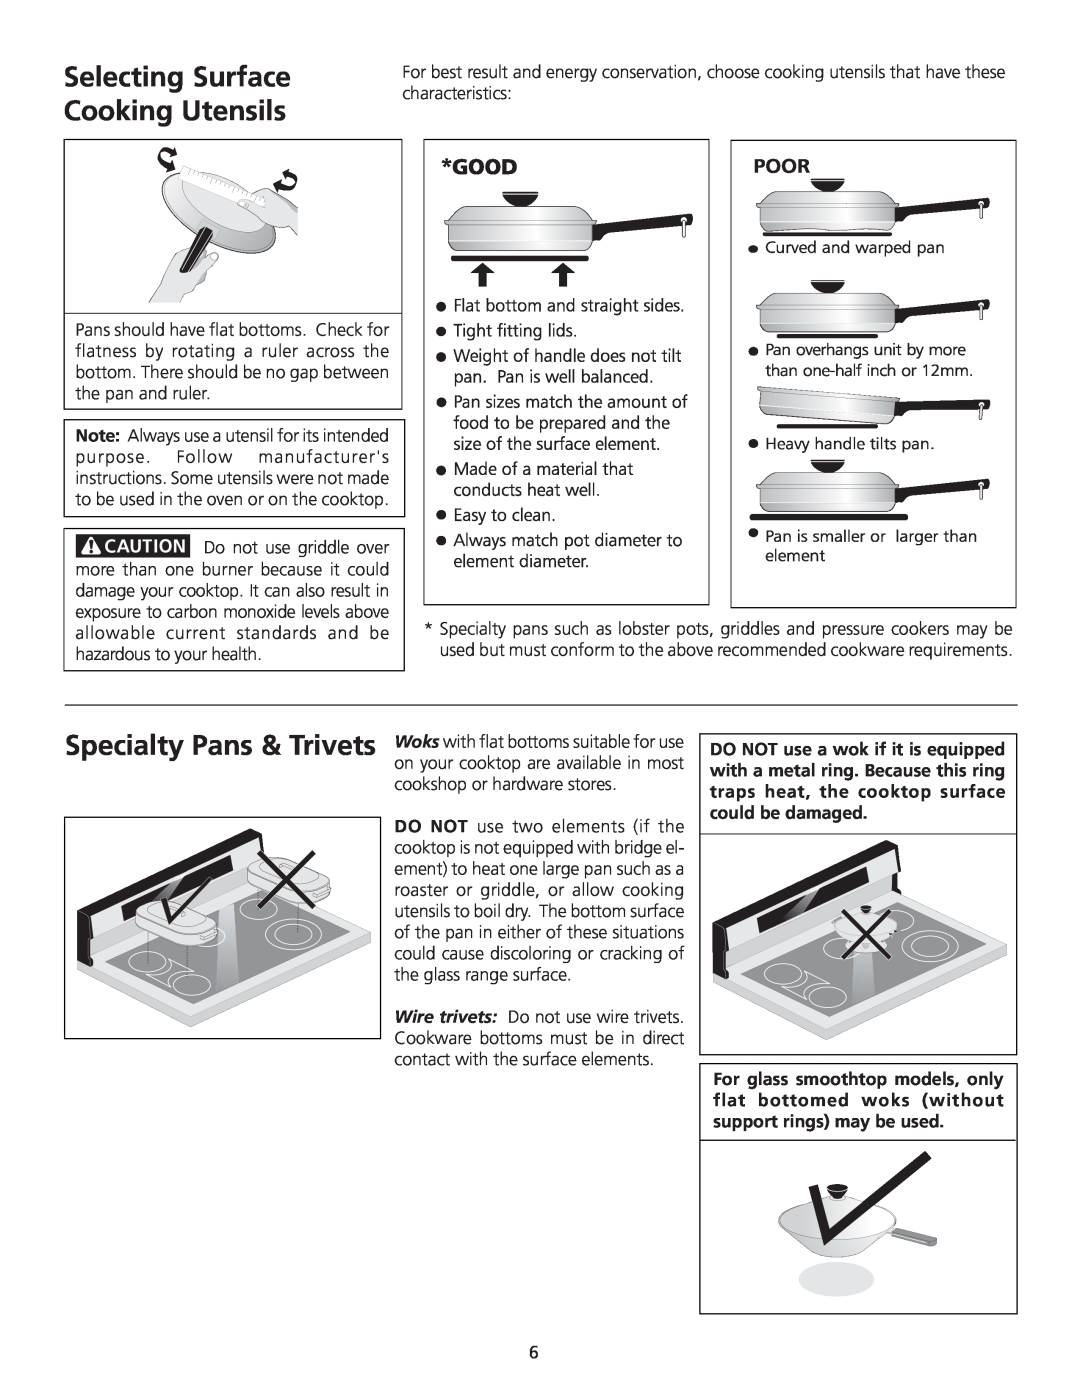 Frigidaire 318200710 important safety instructions Selecting Surface Cooking Utensils 